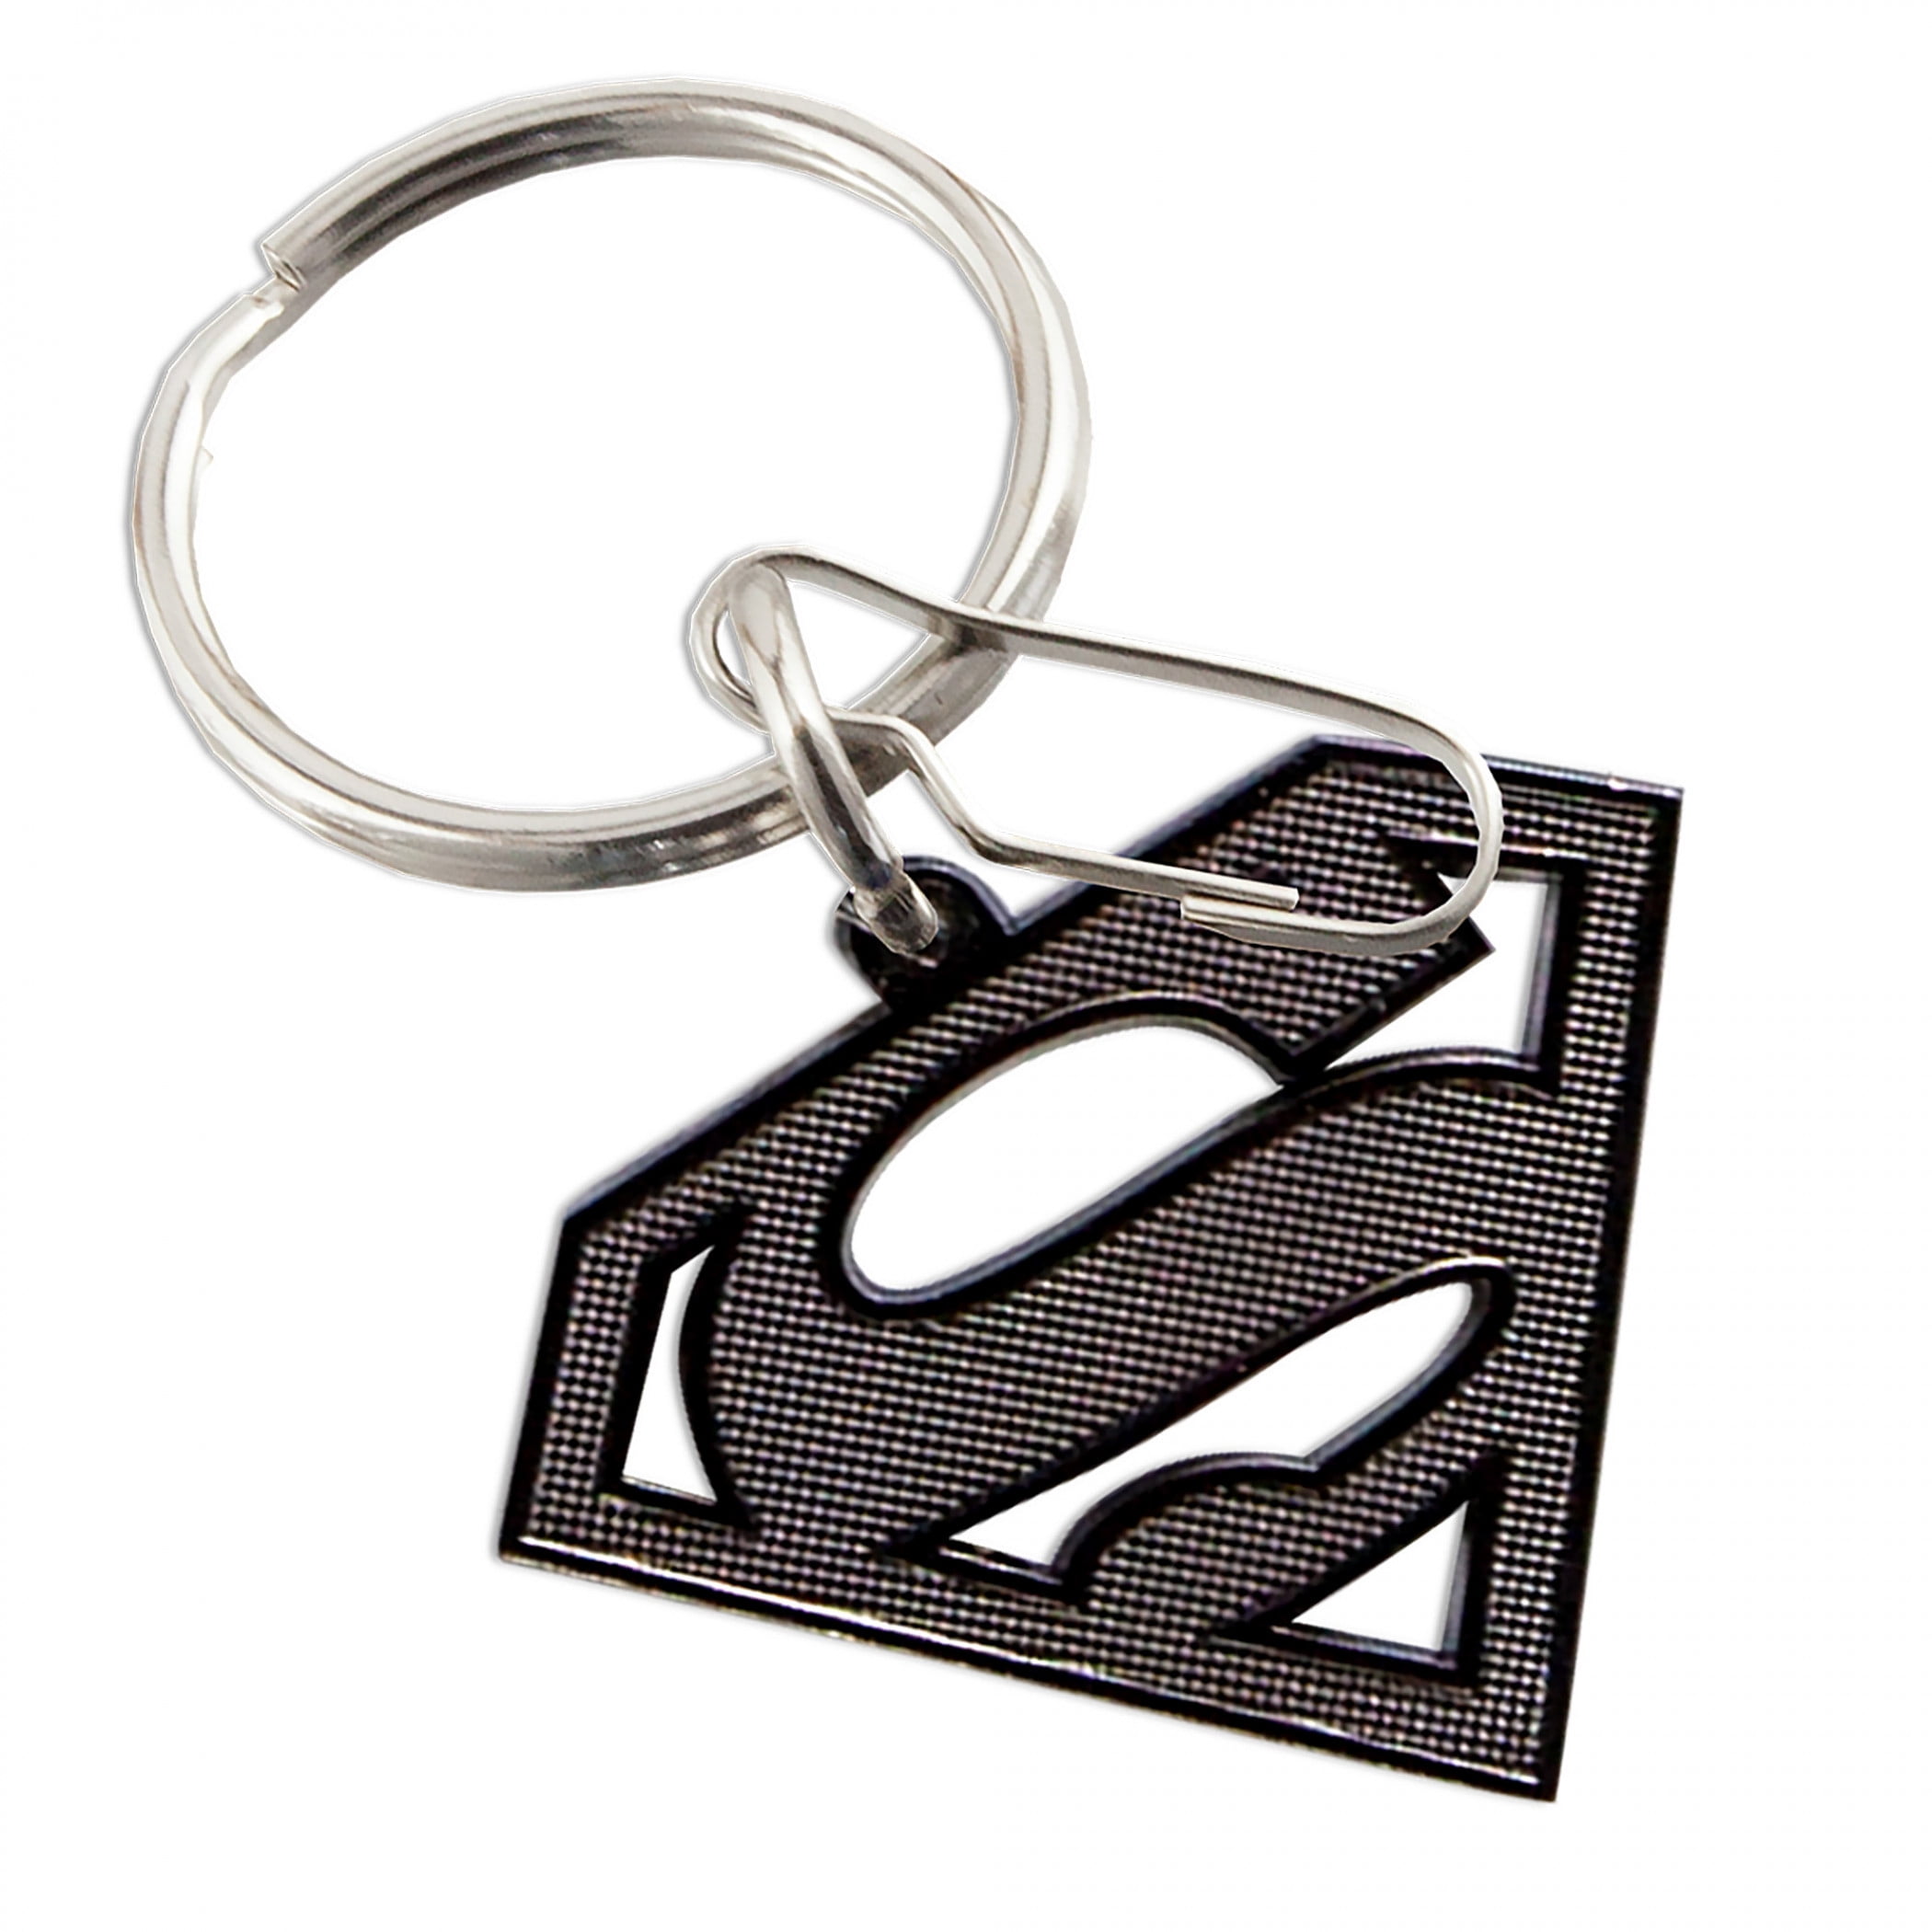 Superman Key Chain Colors Silver Black Made From Mirror Acrylic 